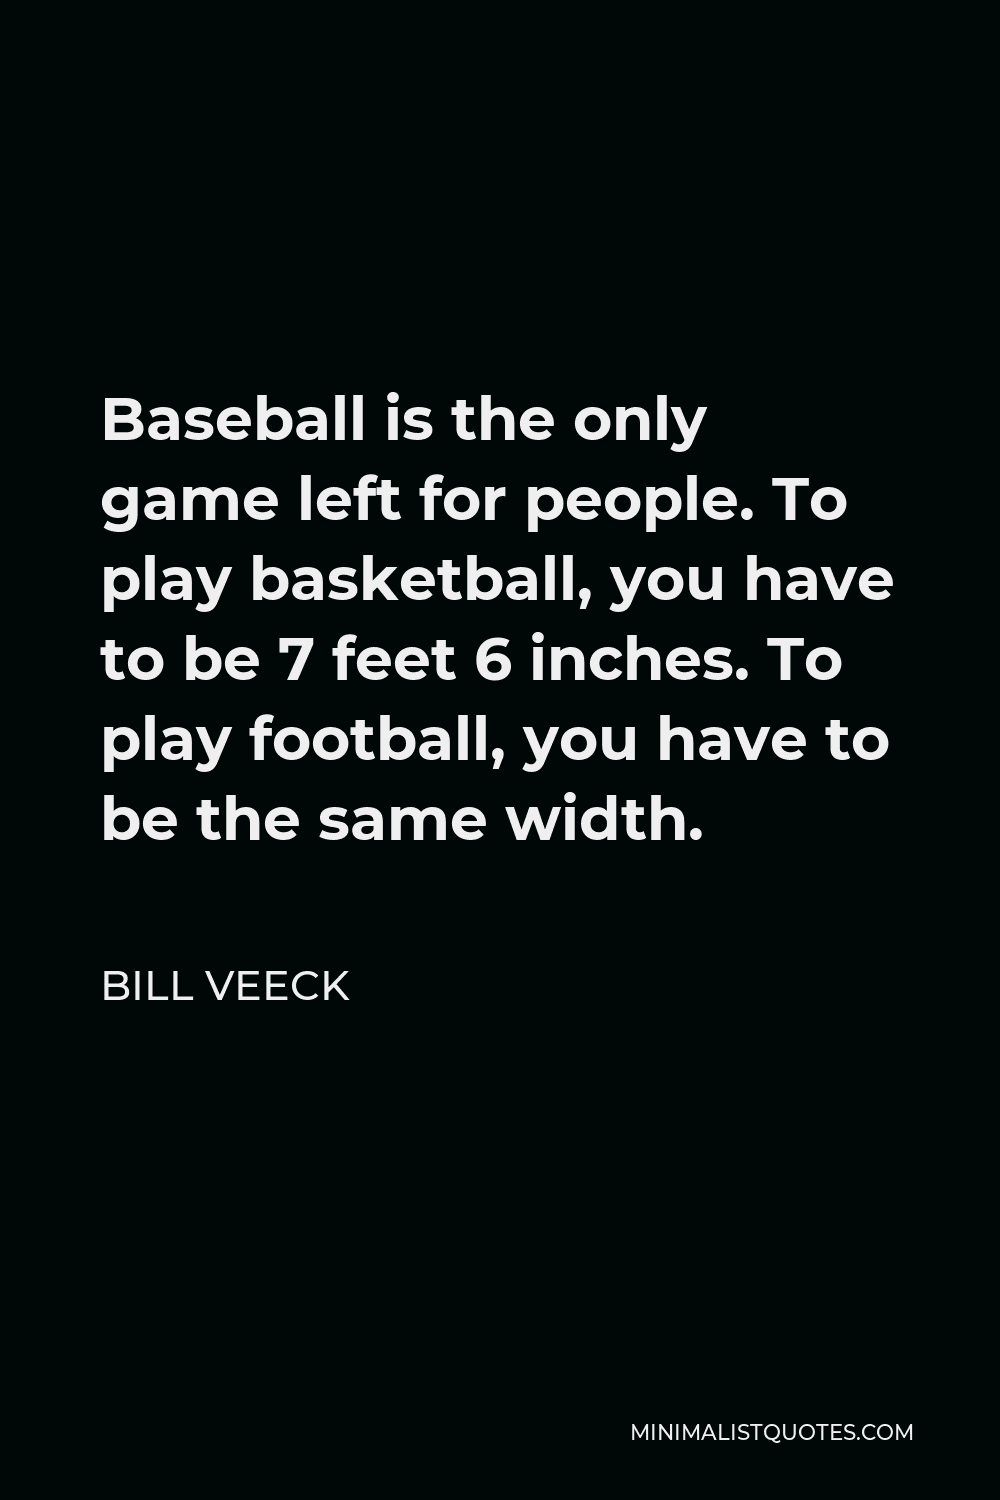 Bill Veeck Quote - Baseball is the only game left for people. To play basketball, you have to be 7 feet 6 inches. To play football, you have to be the same width.